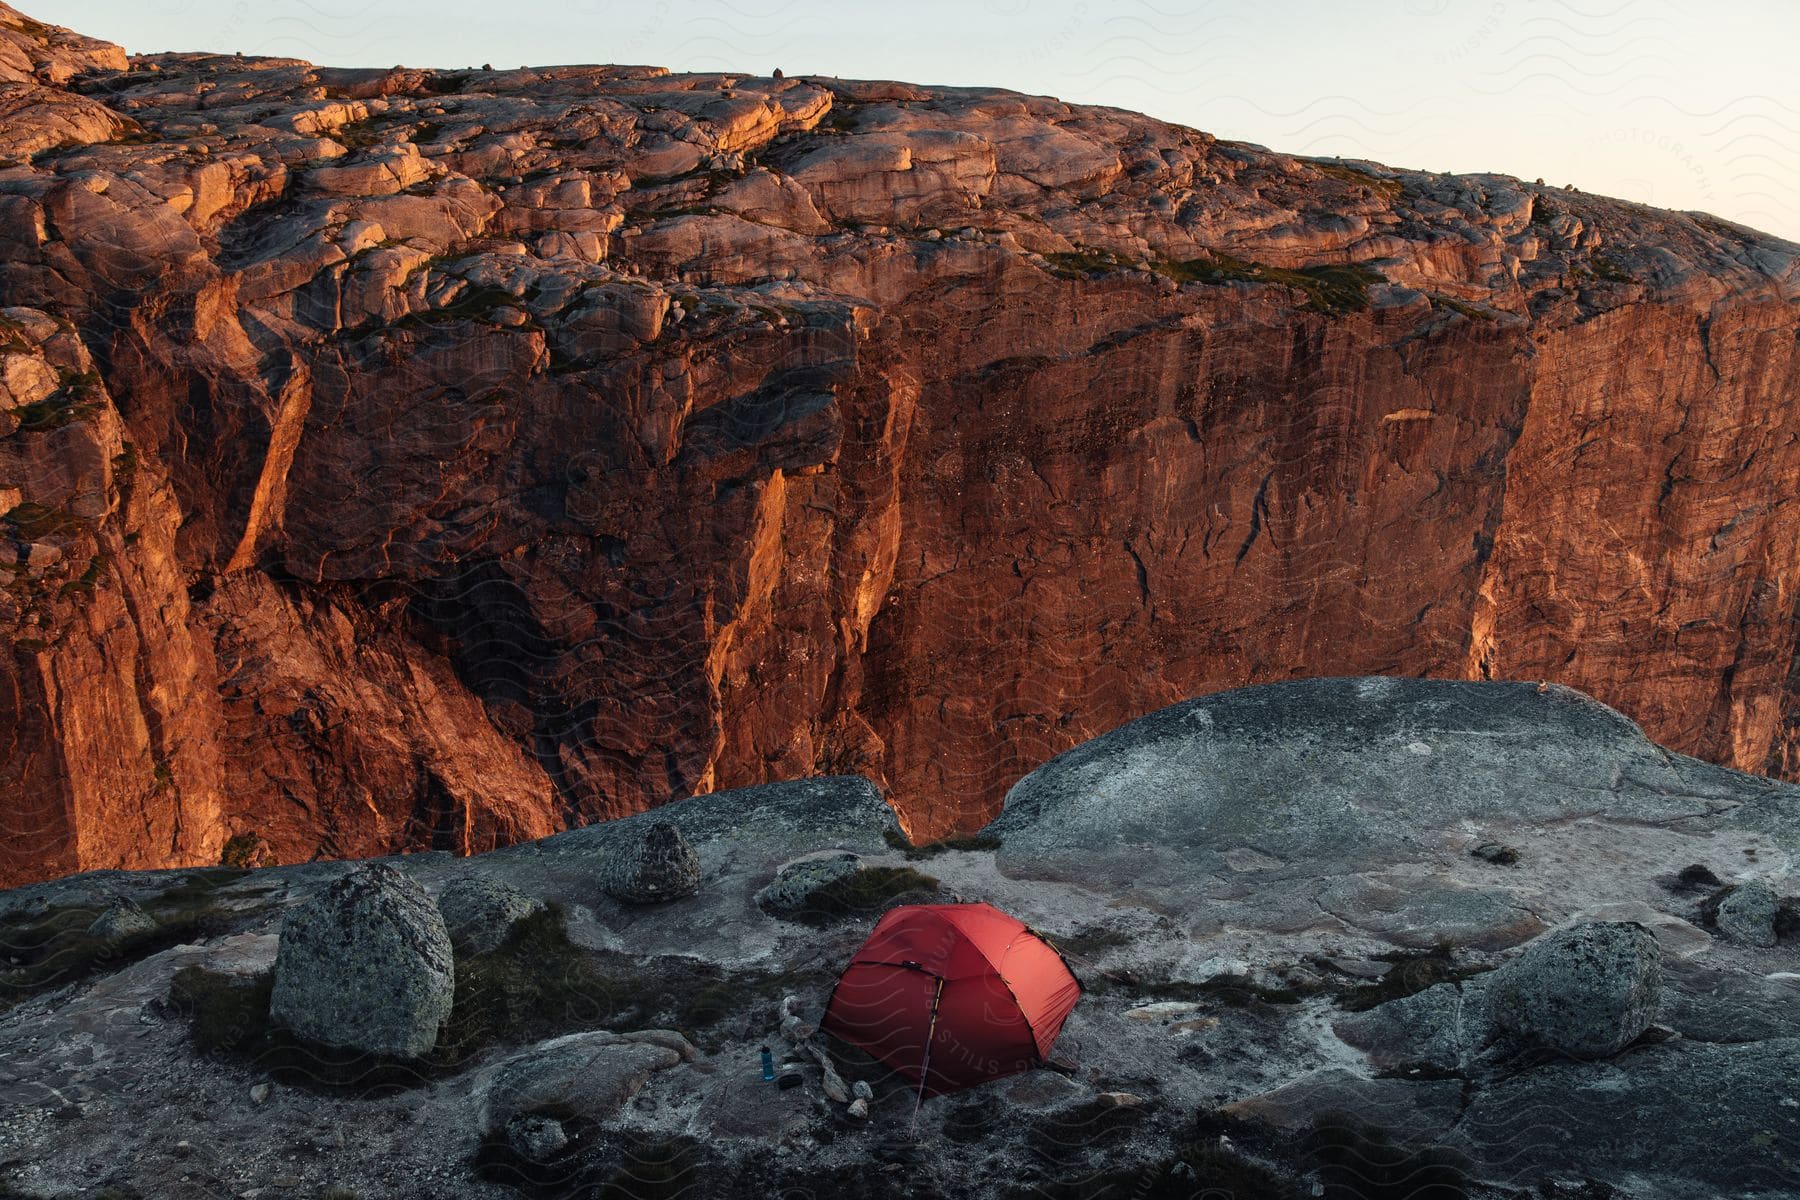 A red tent is perched on a cliff of black rocks overlooking a canyon